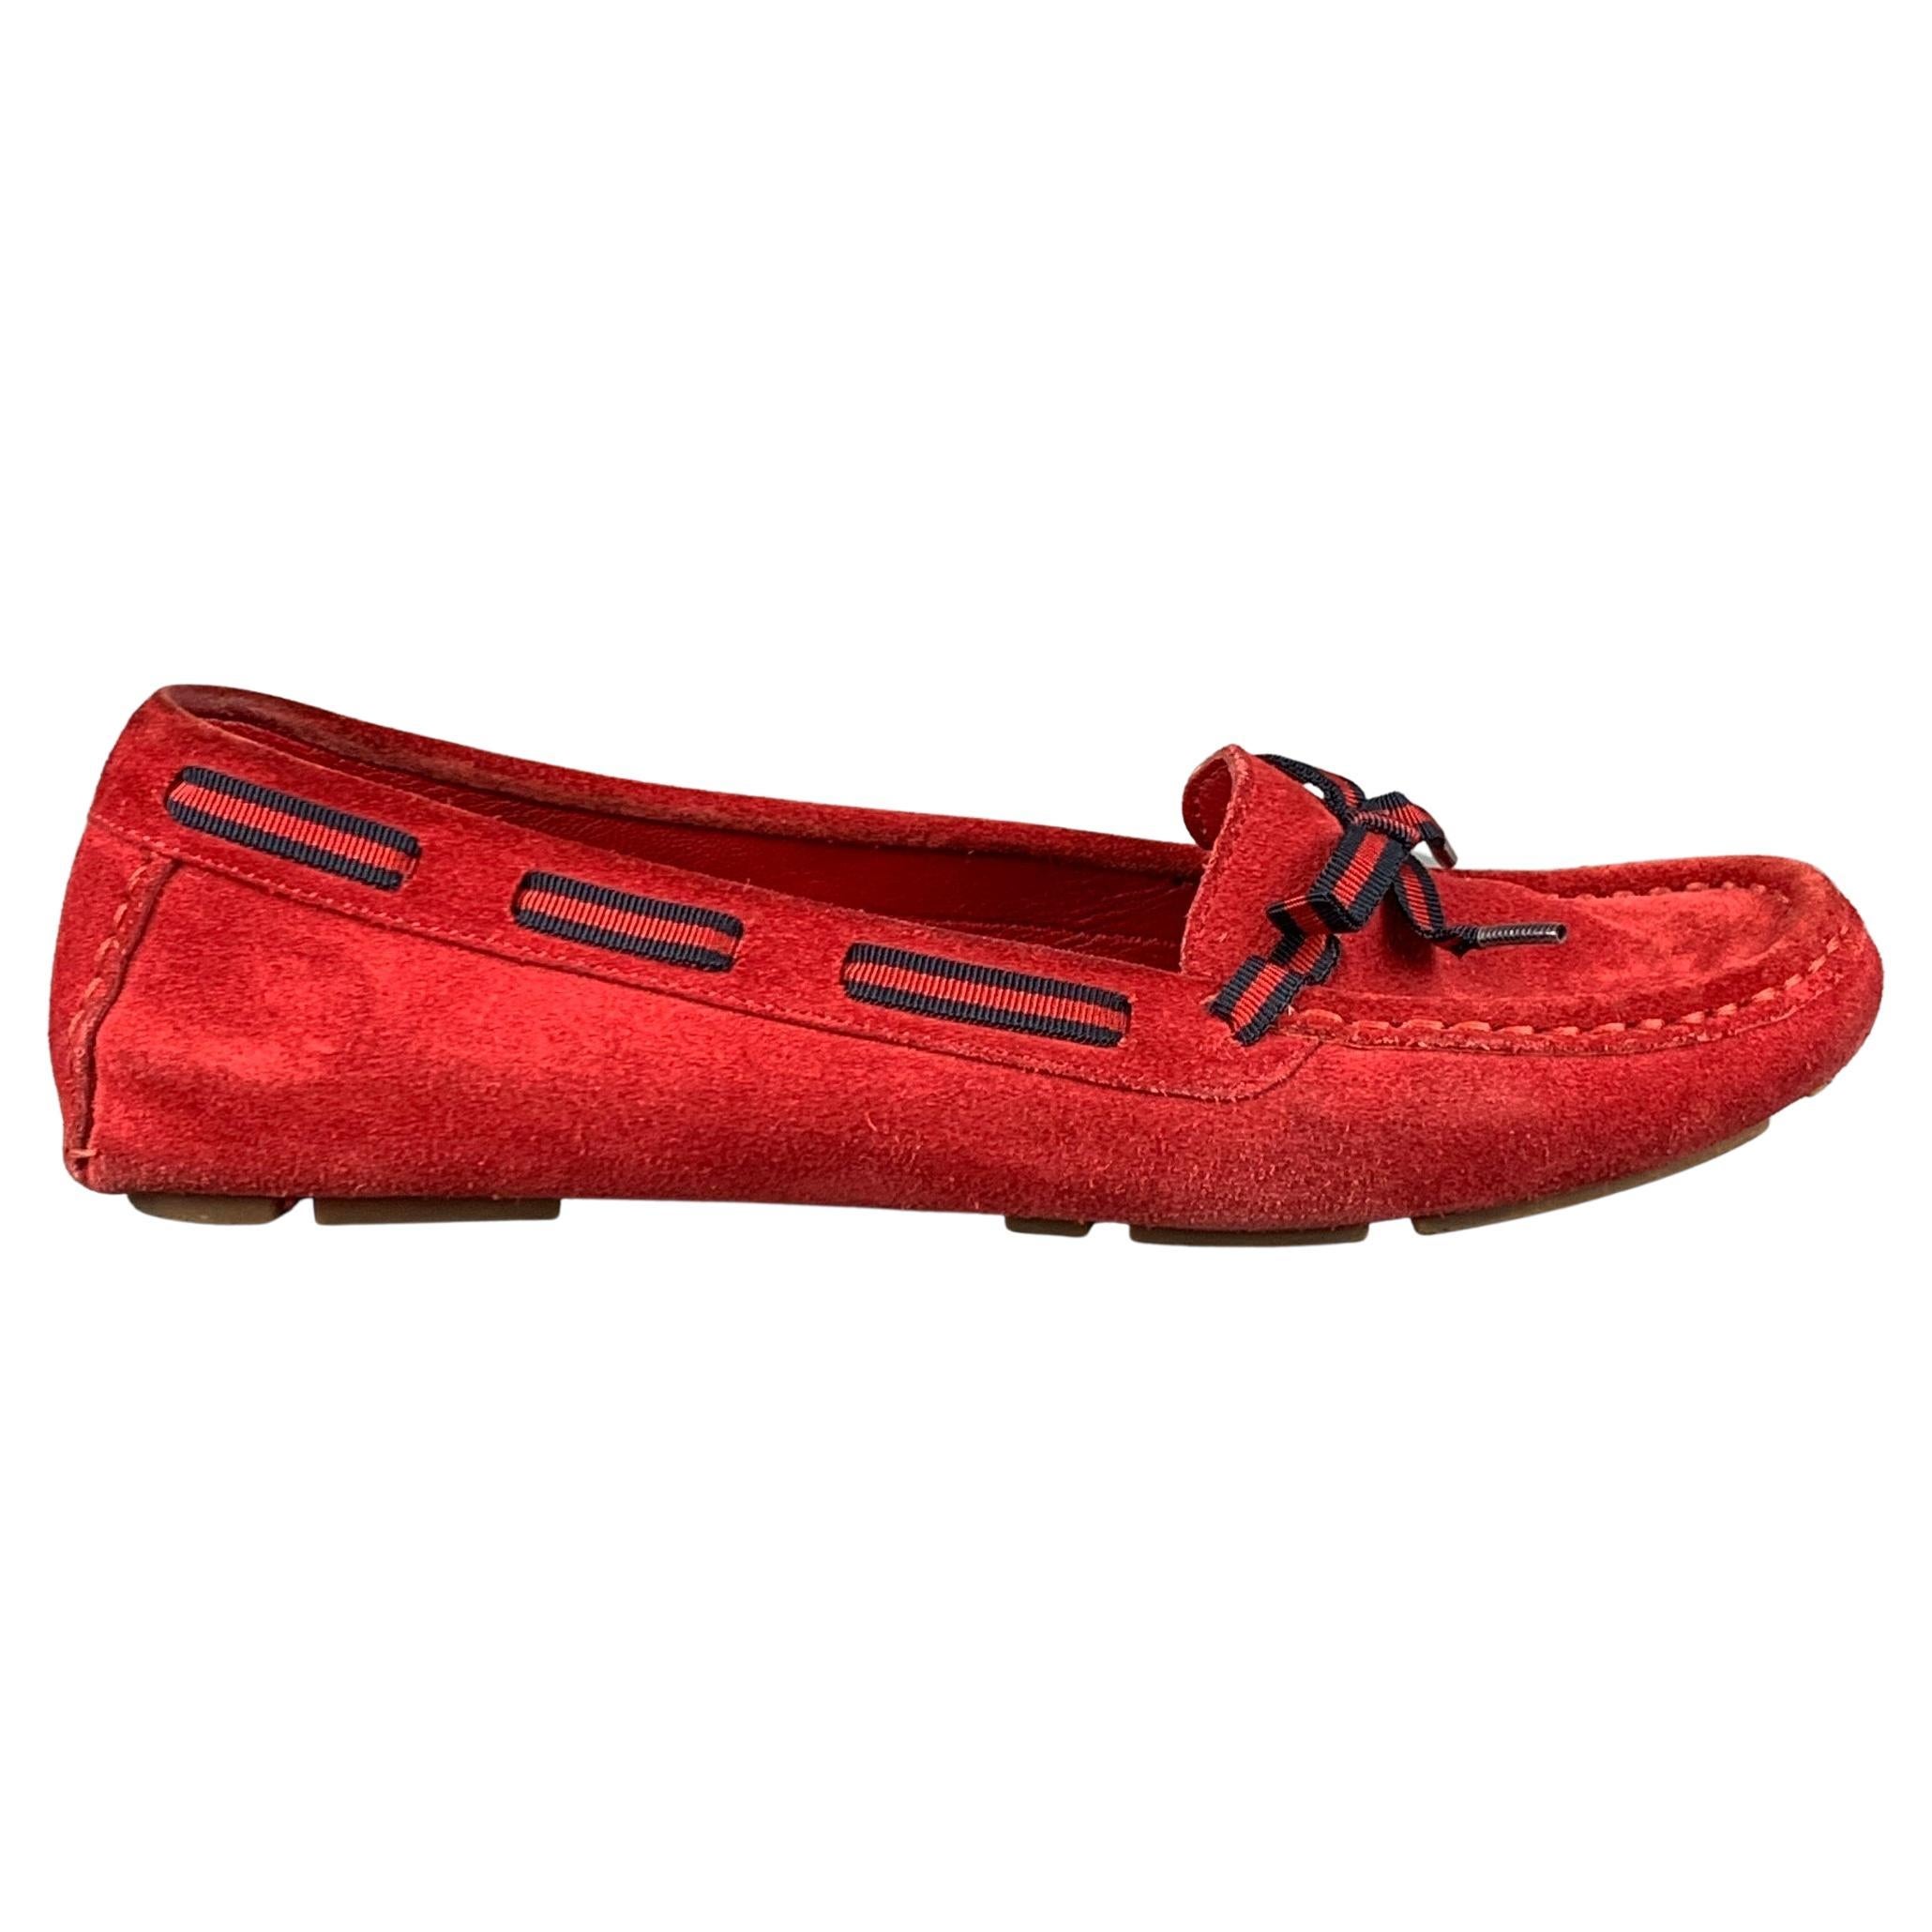 Vintage GUCCI Size 7 Red Navy Suede Ribbon Drivers Flats